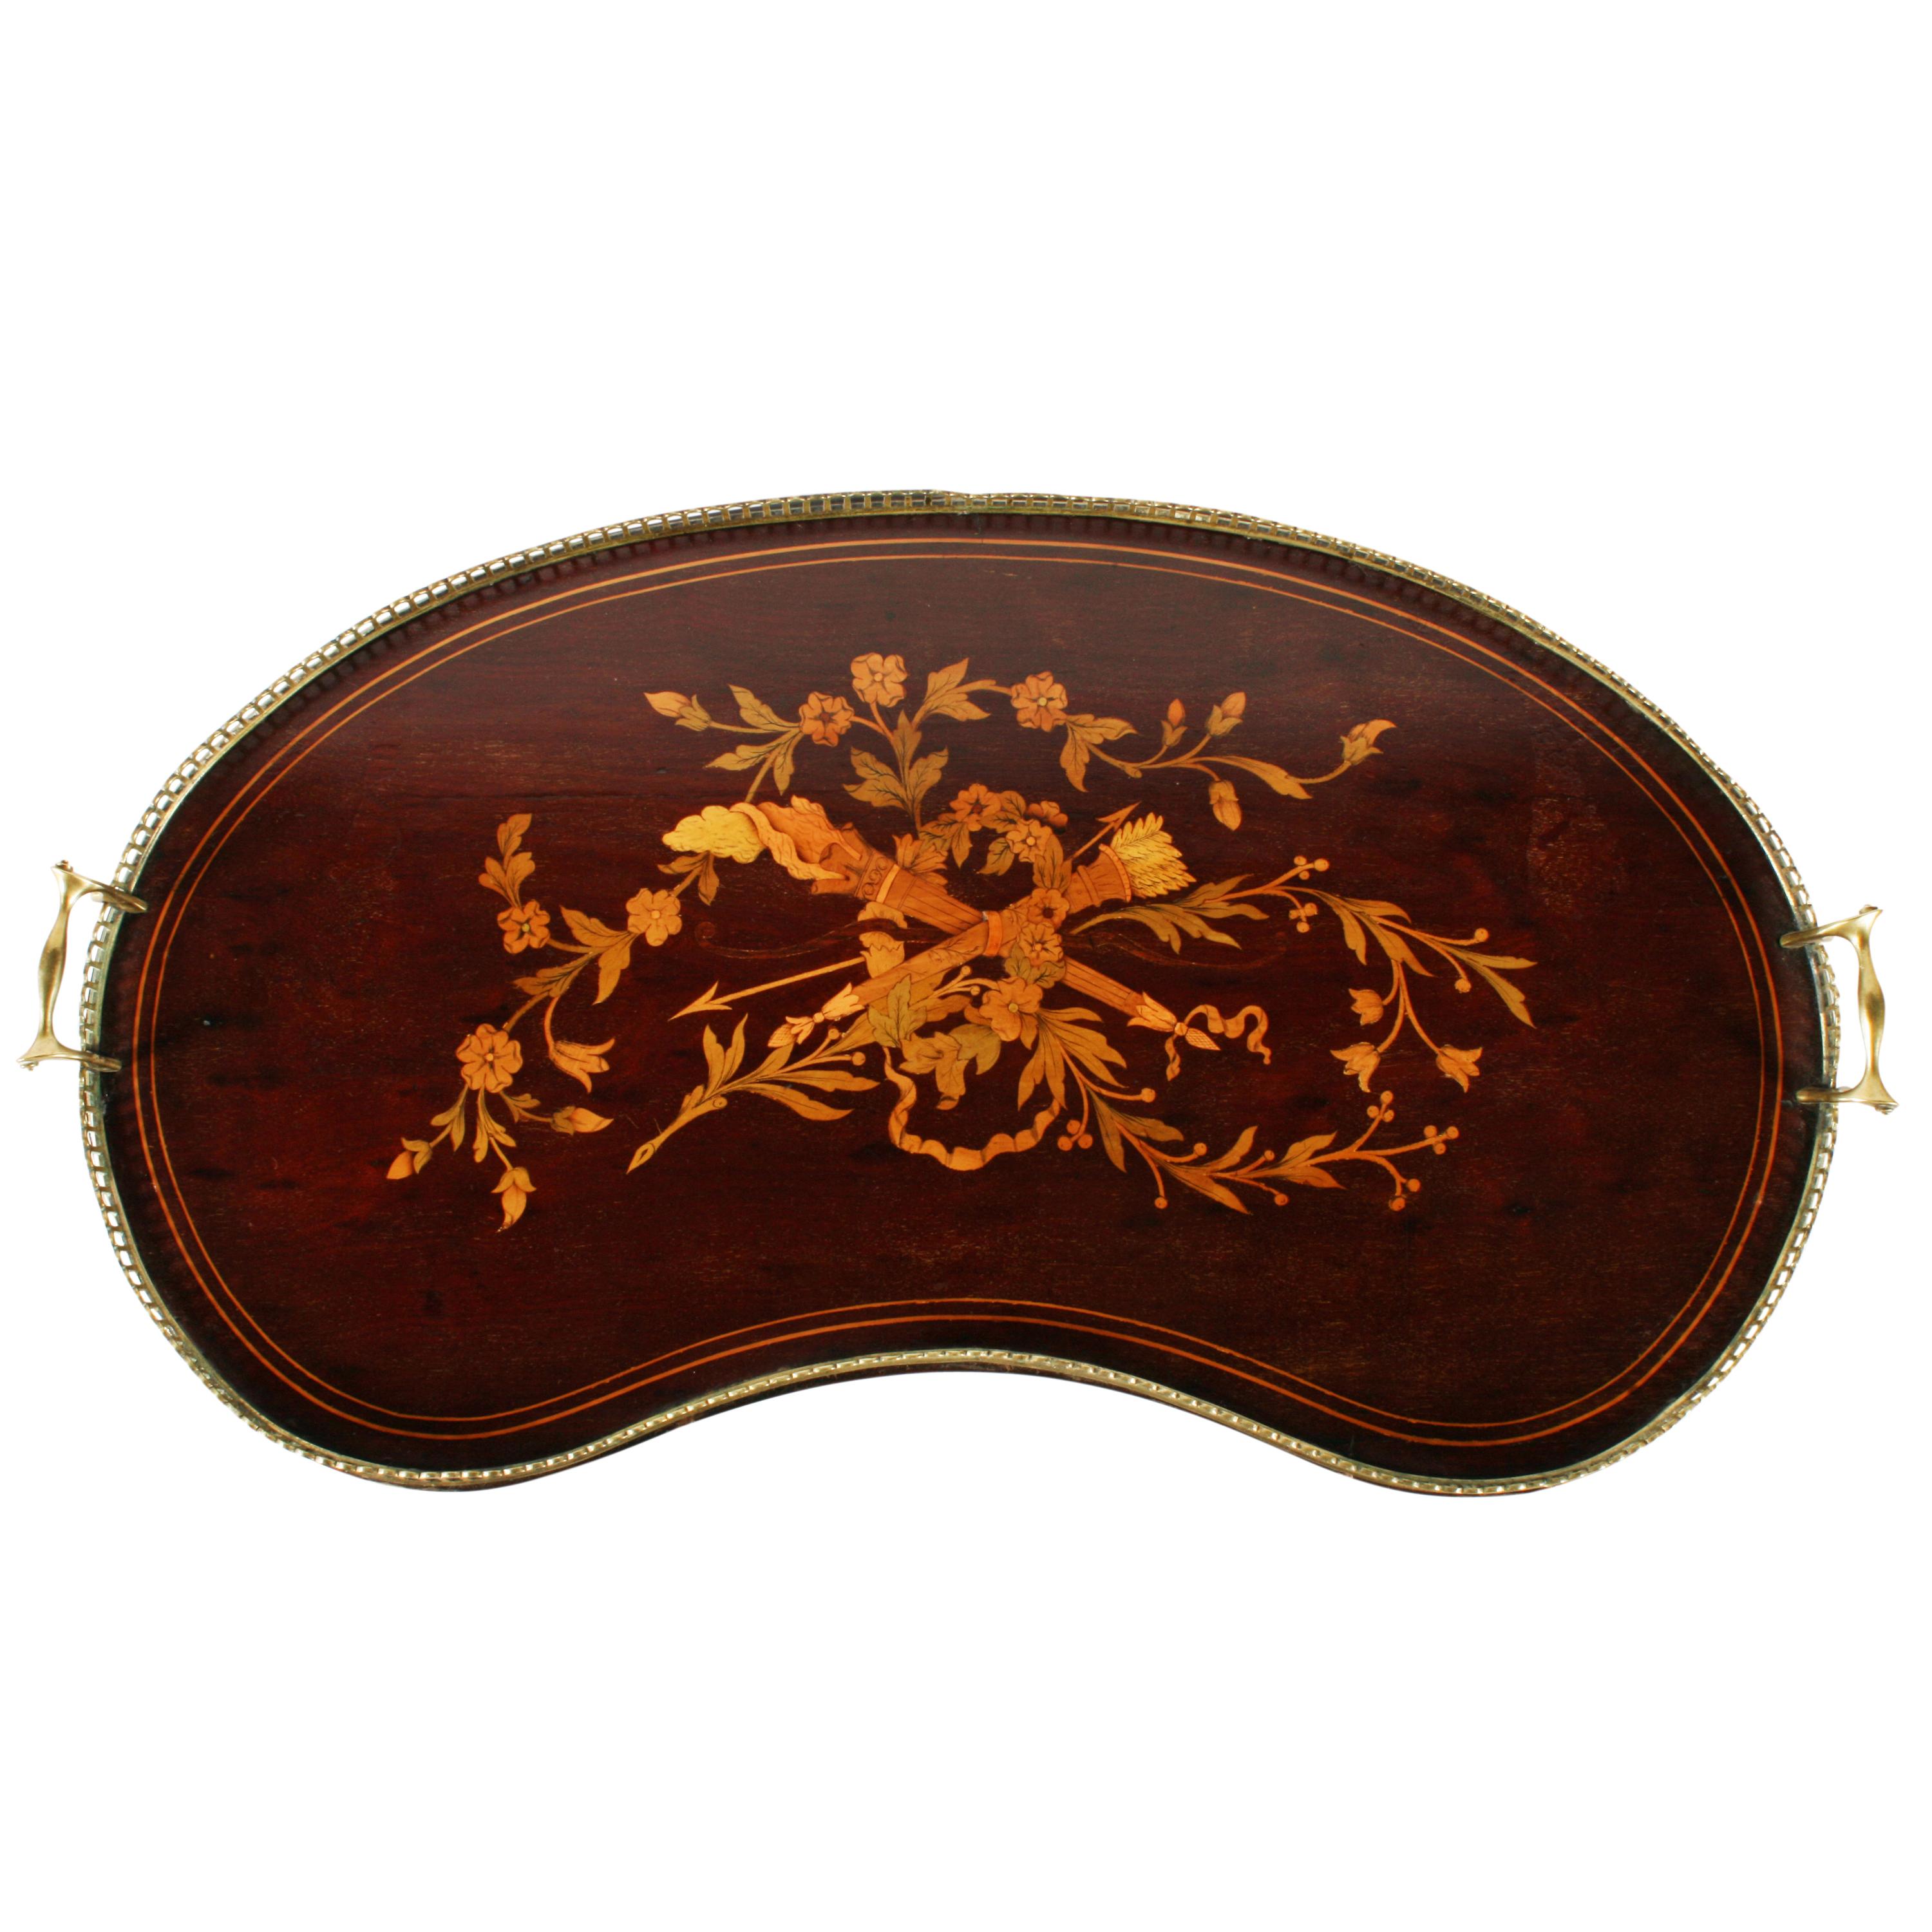 Marquetry Inlaid Kidney Shaped Tray (Marketerie) im Angebot